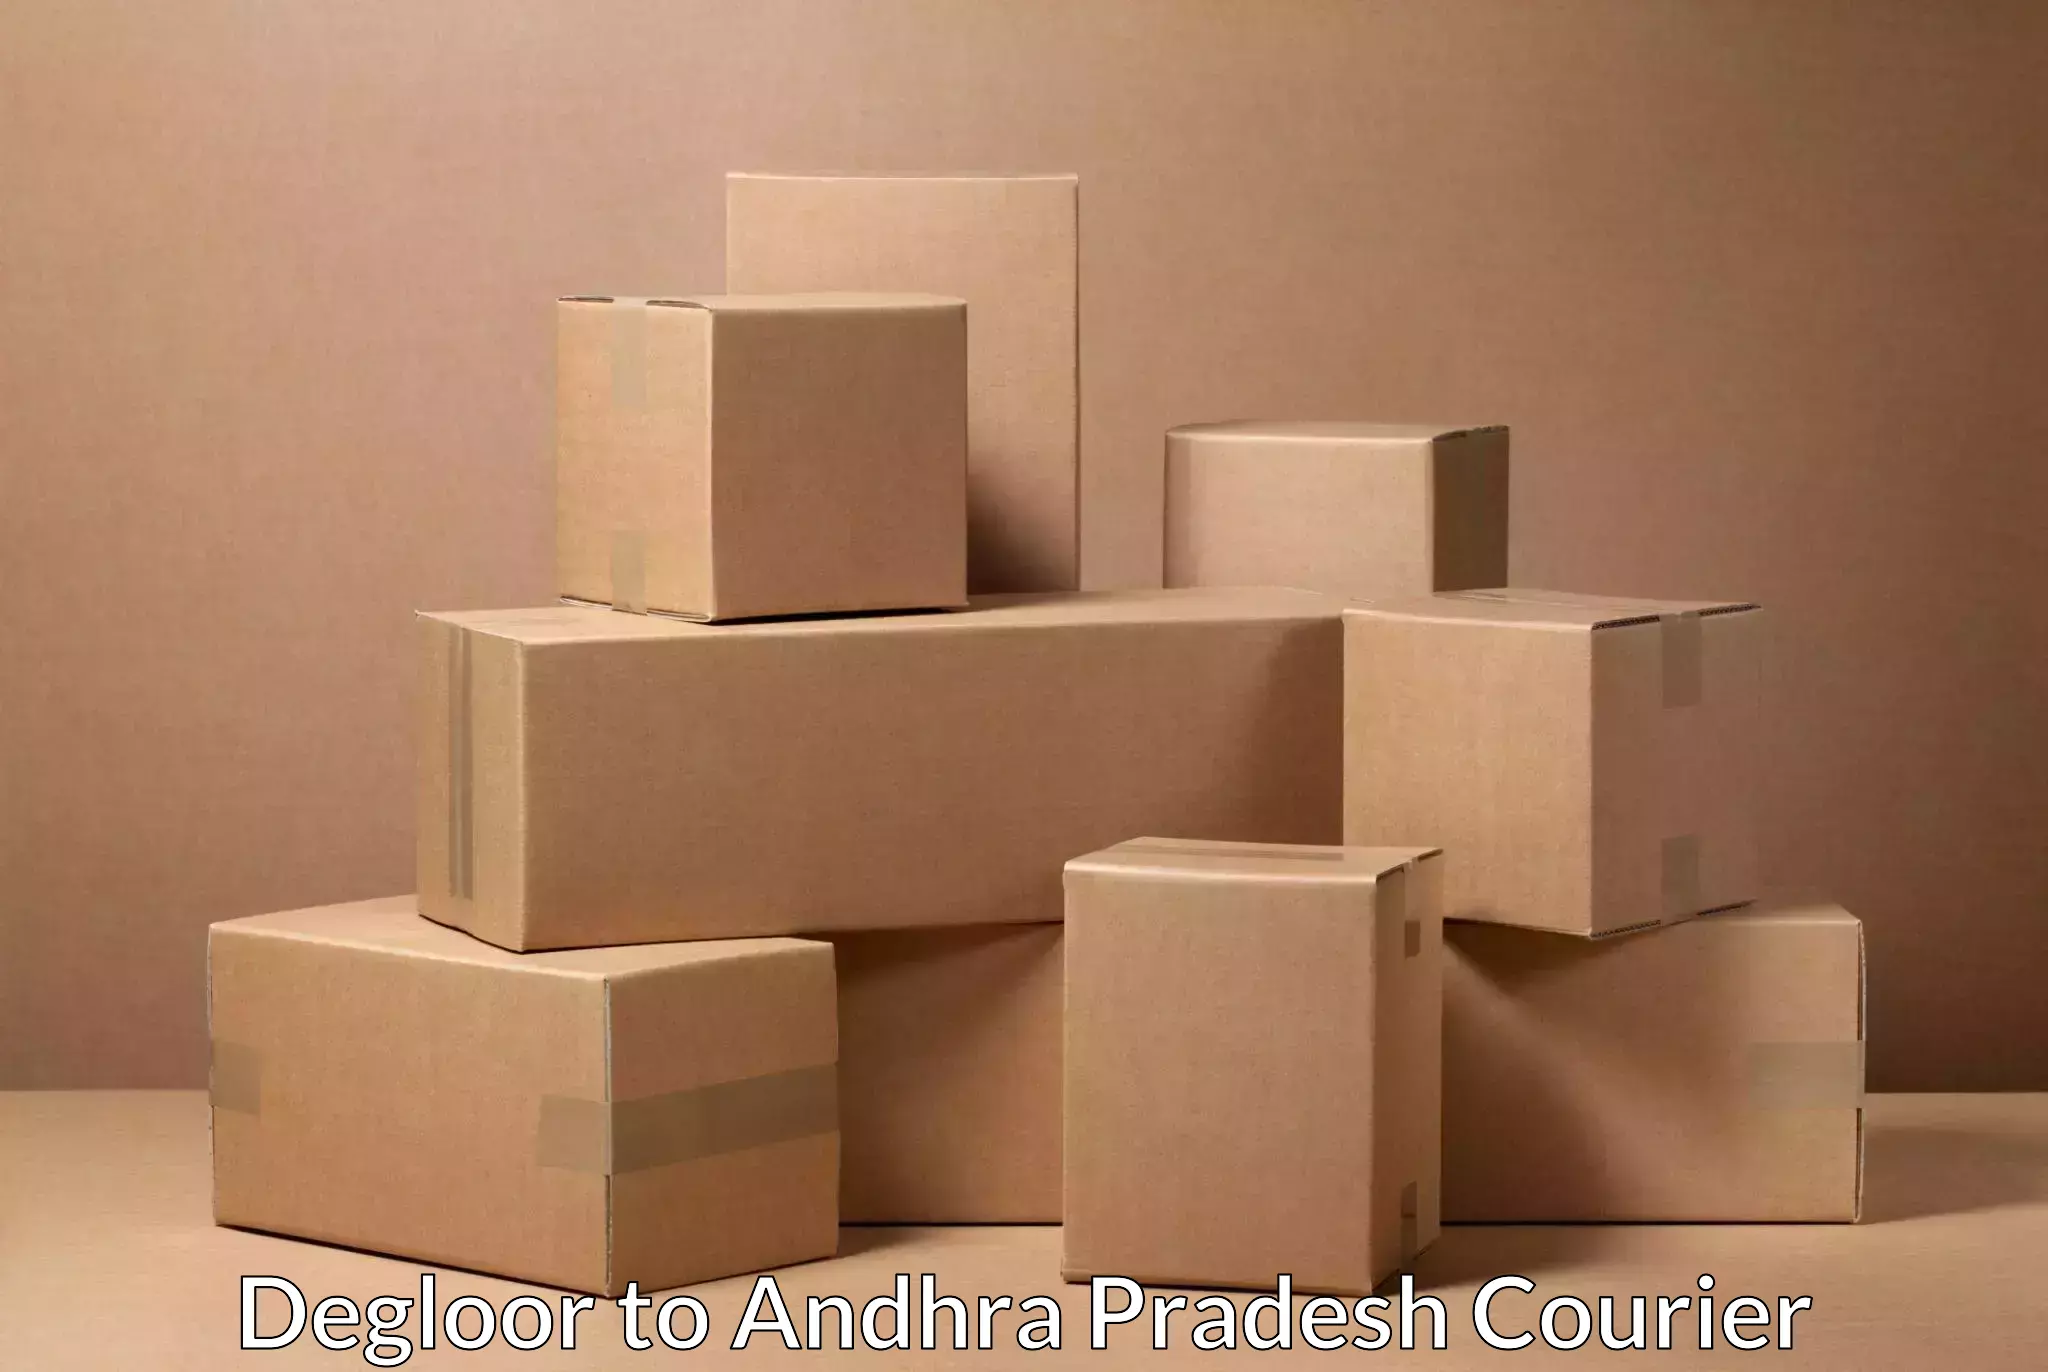 Business shipping needs in Degloor to Visakhapatnam Port